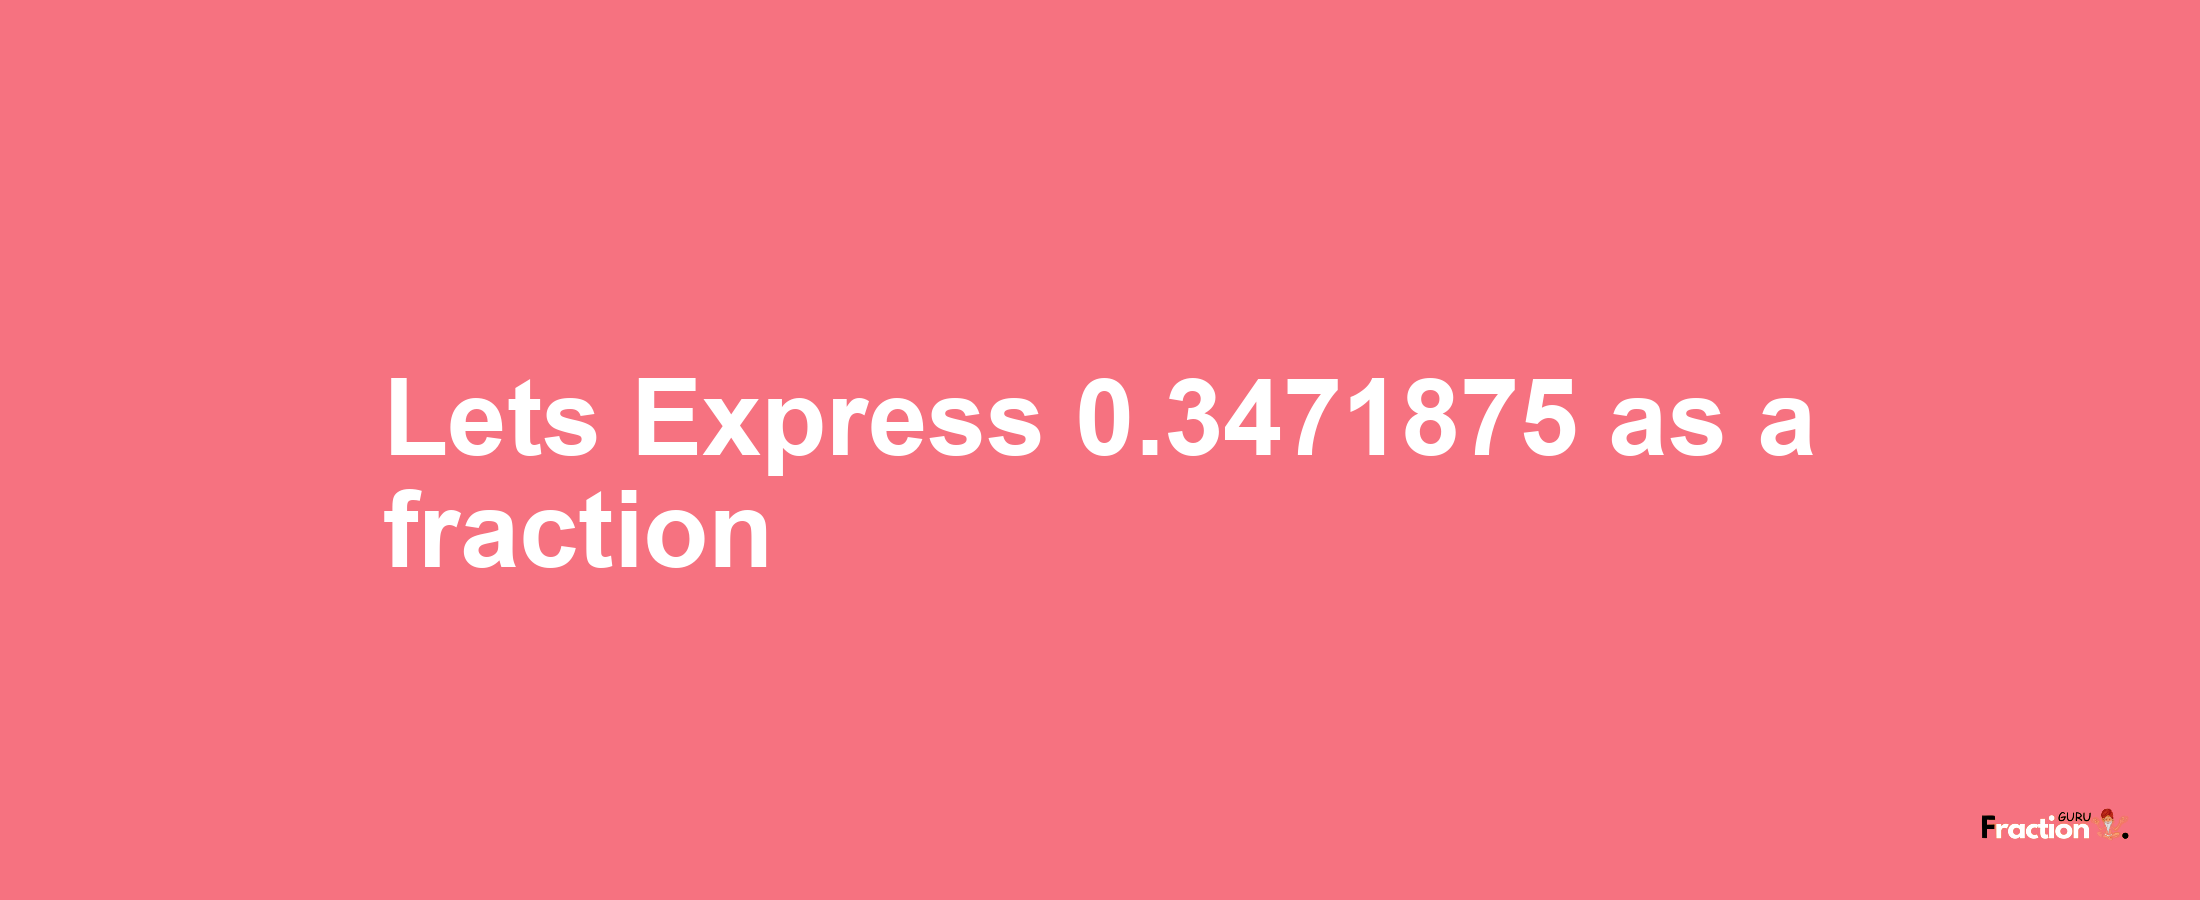 Lets Express 0.3471875 as afraction